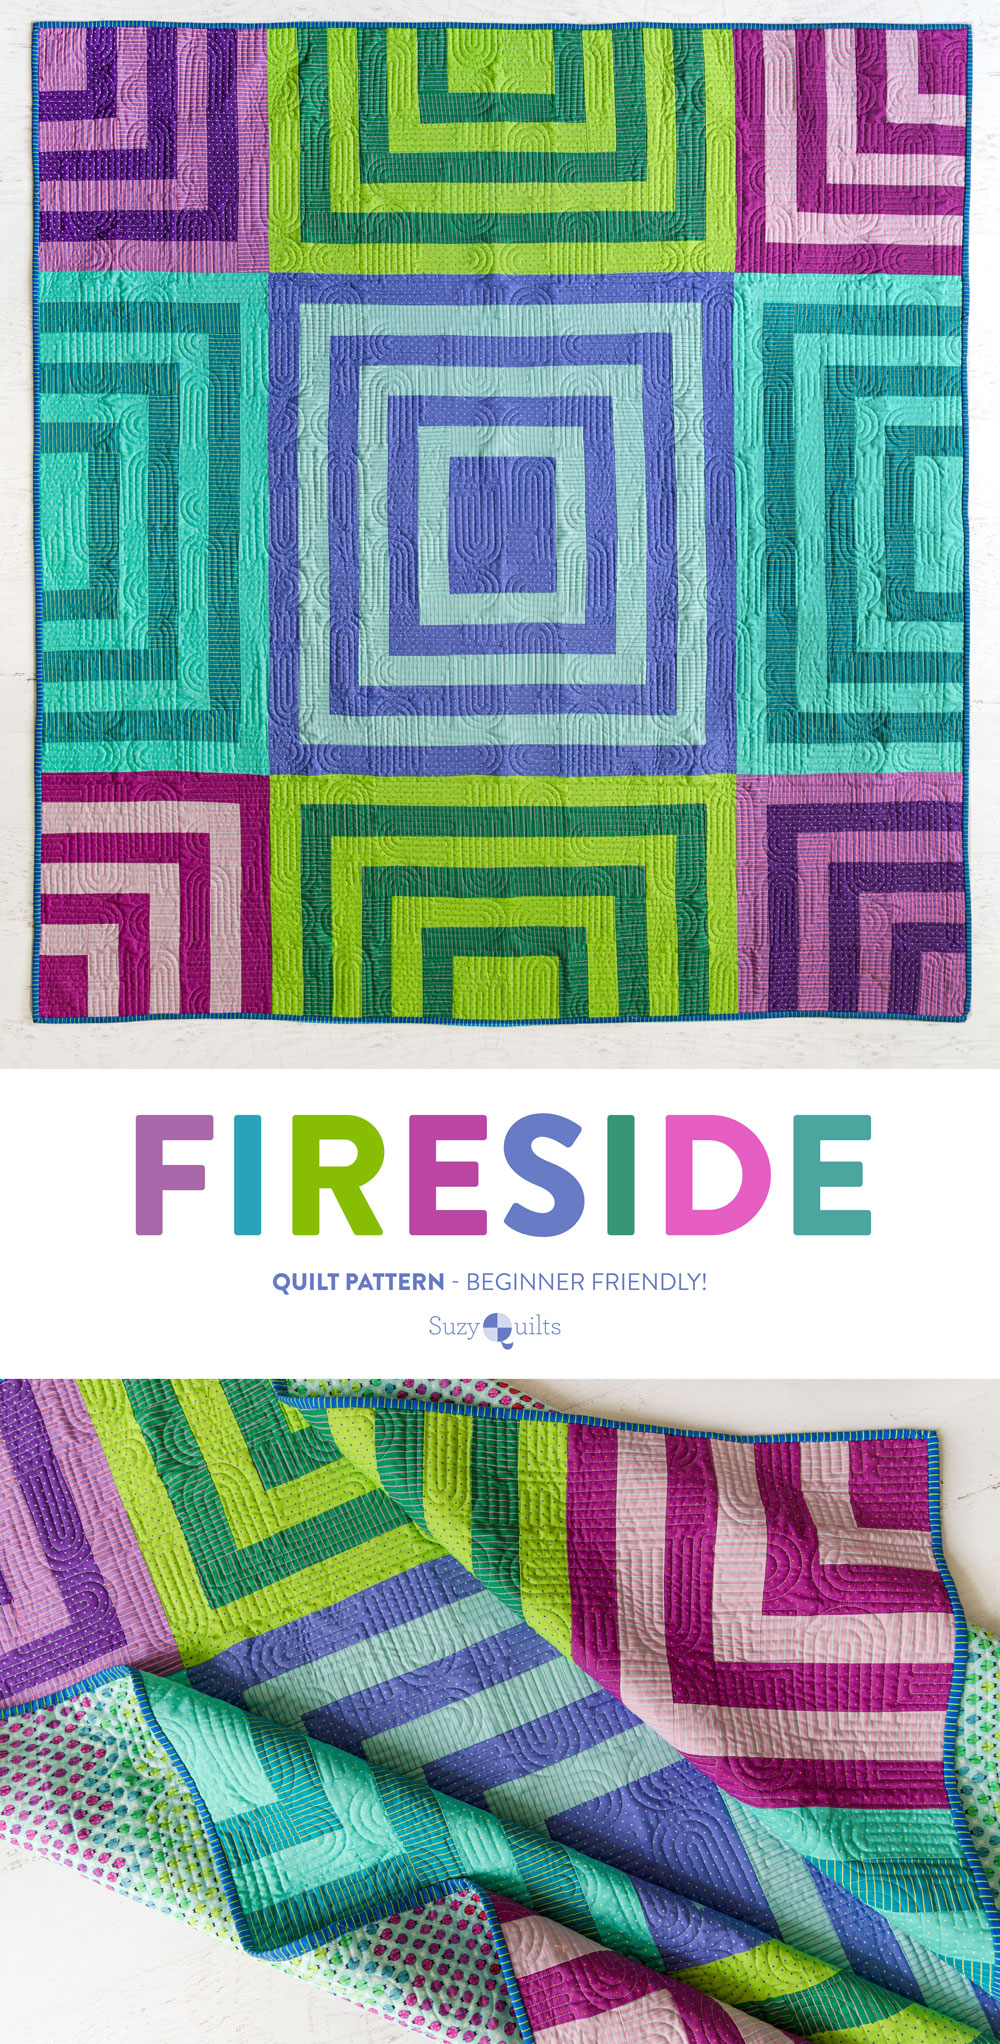 The Fireside quilt pattern includes multiple layout and color options. Flex your creativity and make one that's totally unique! suzyquilts.com #quiltpattern